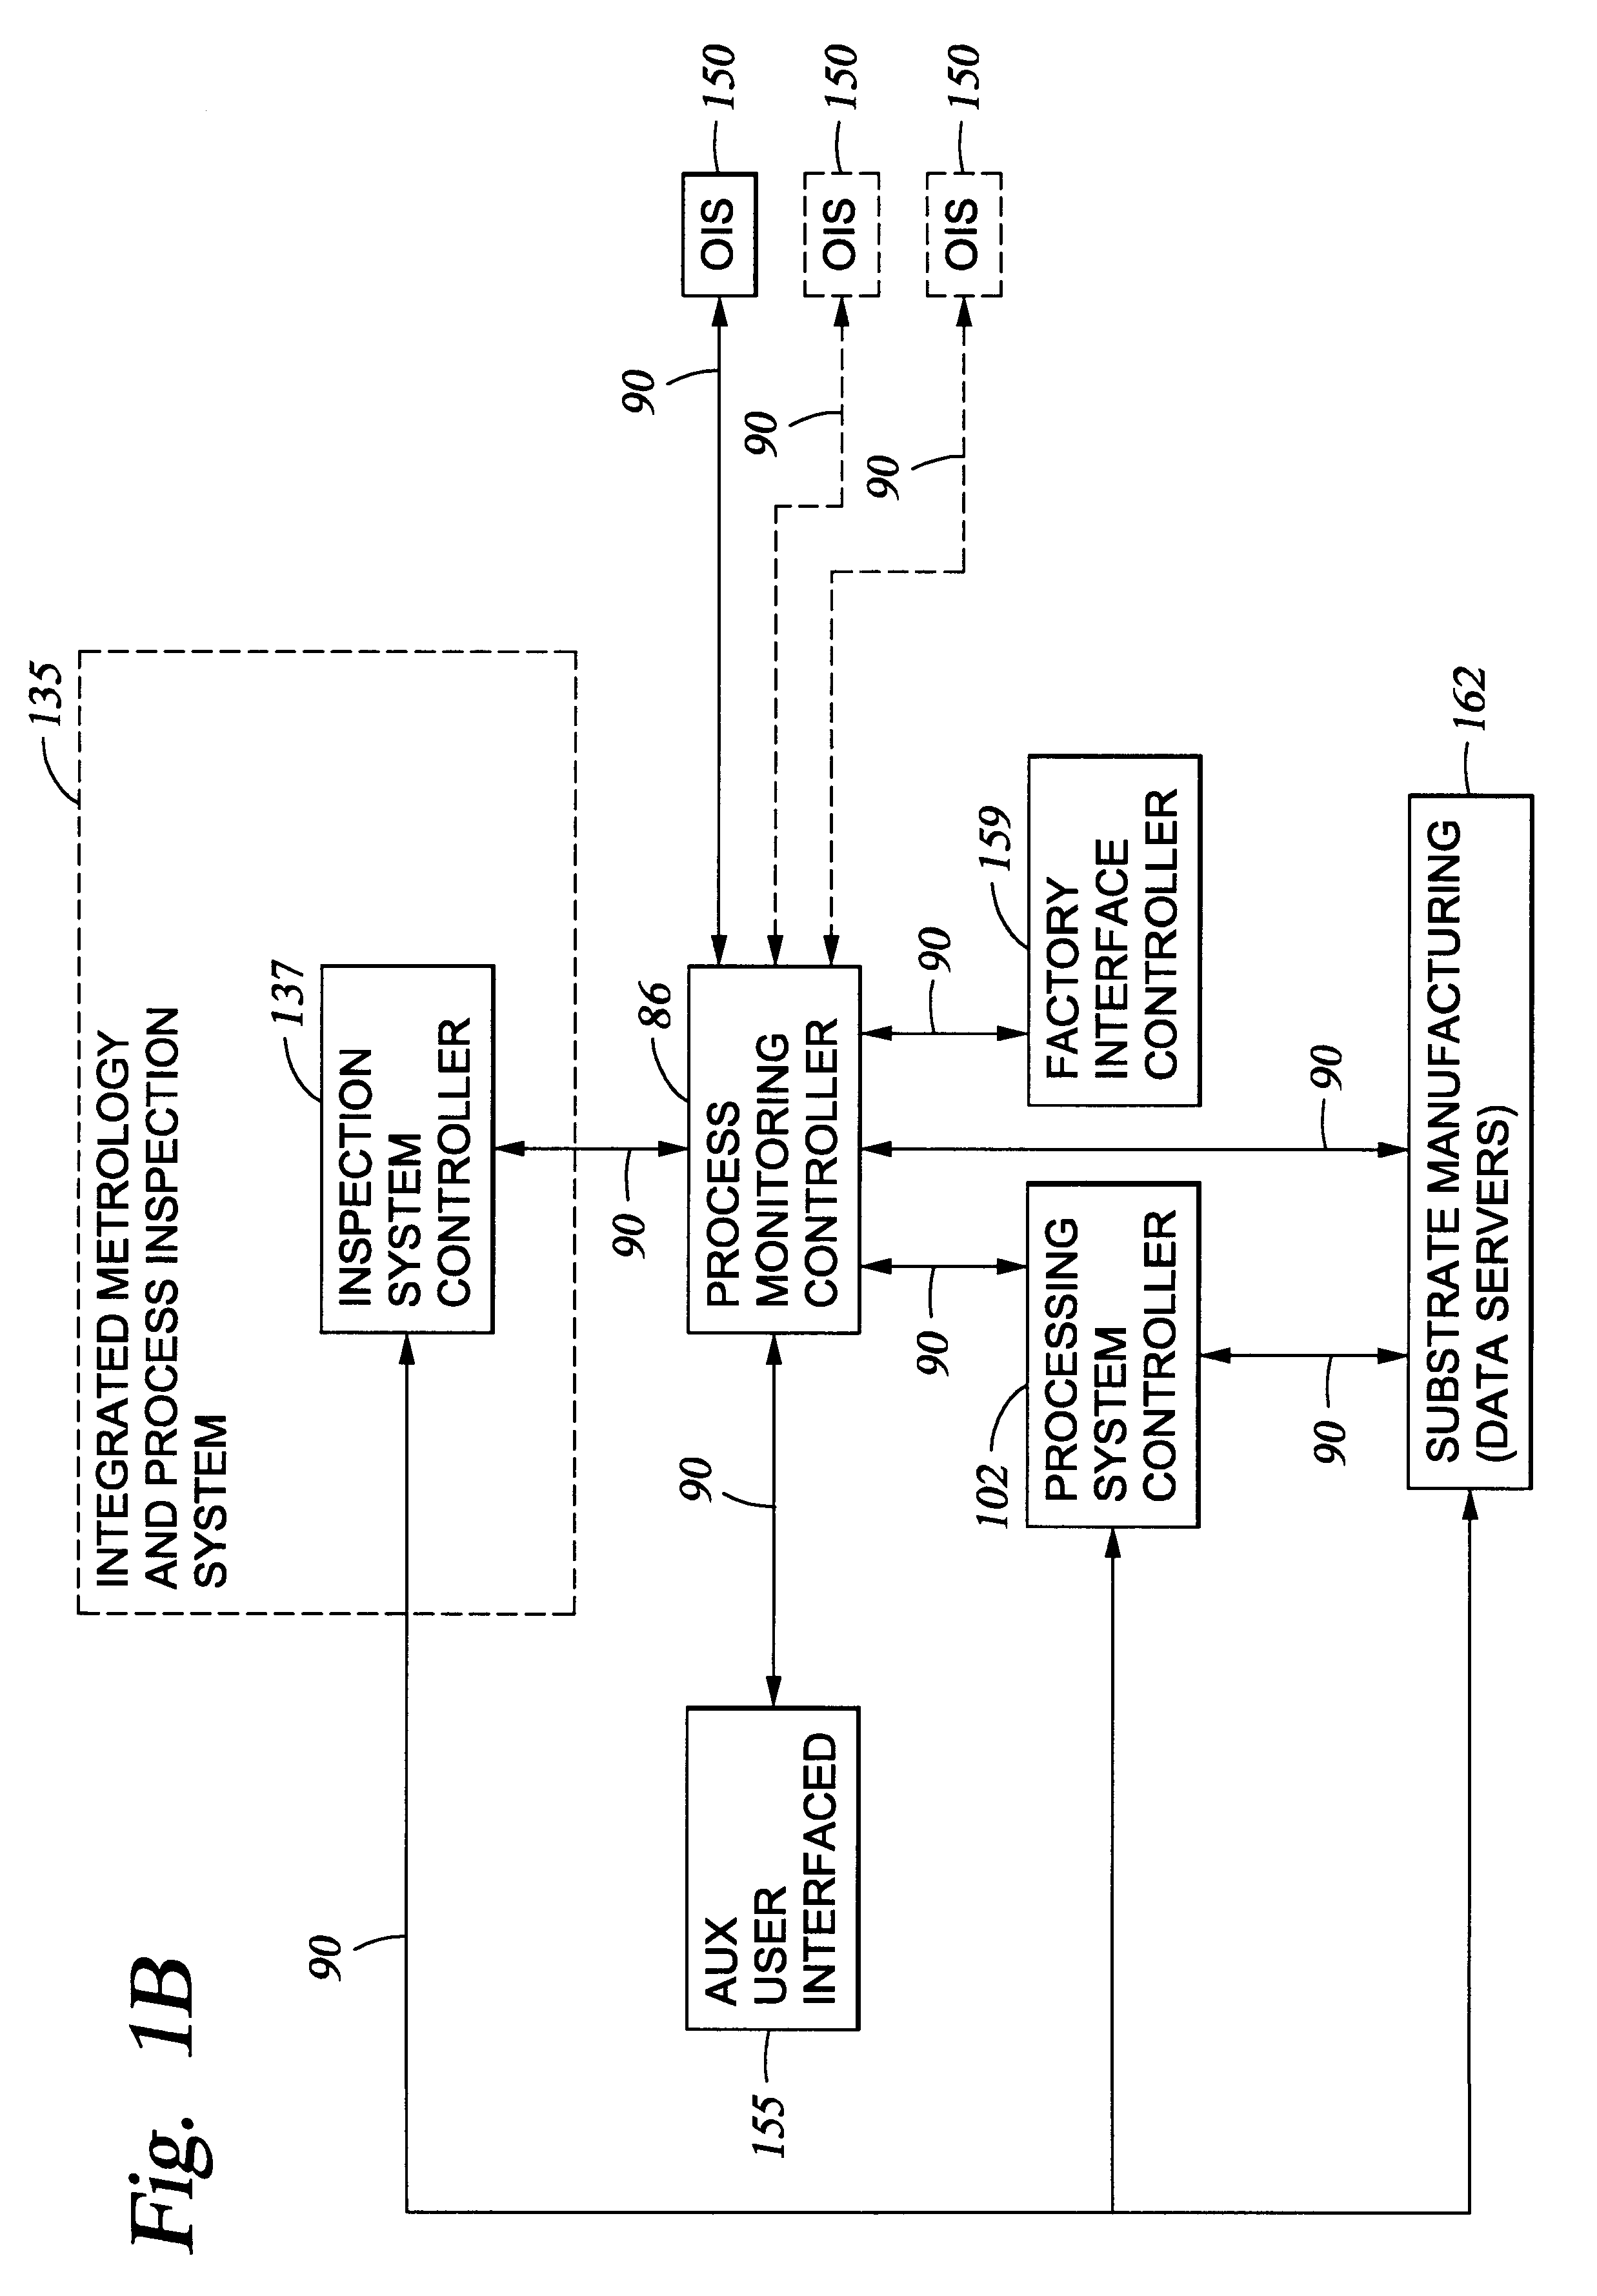 Method and apparatus for substrate surface inspection using spectral profiling techniques